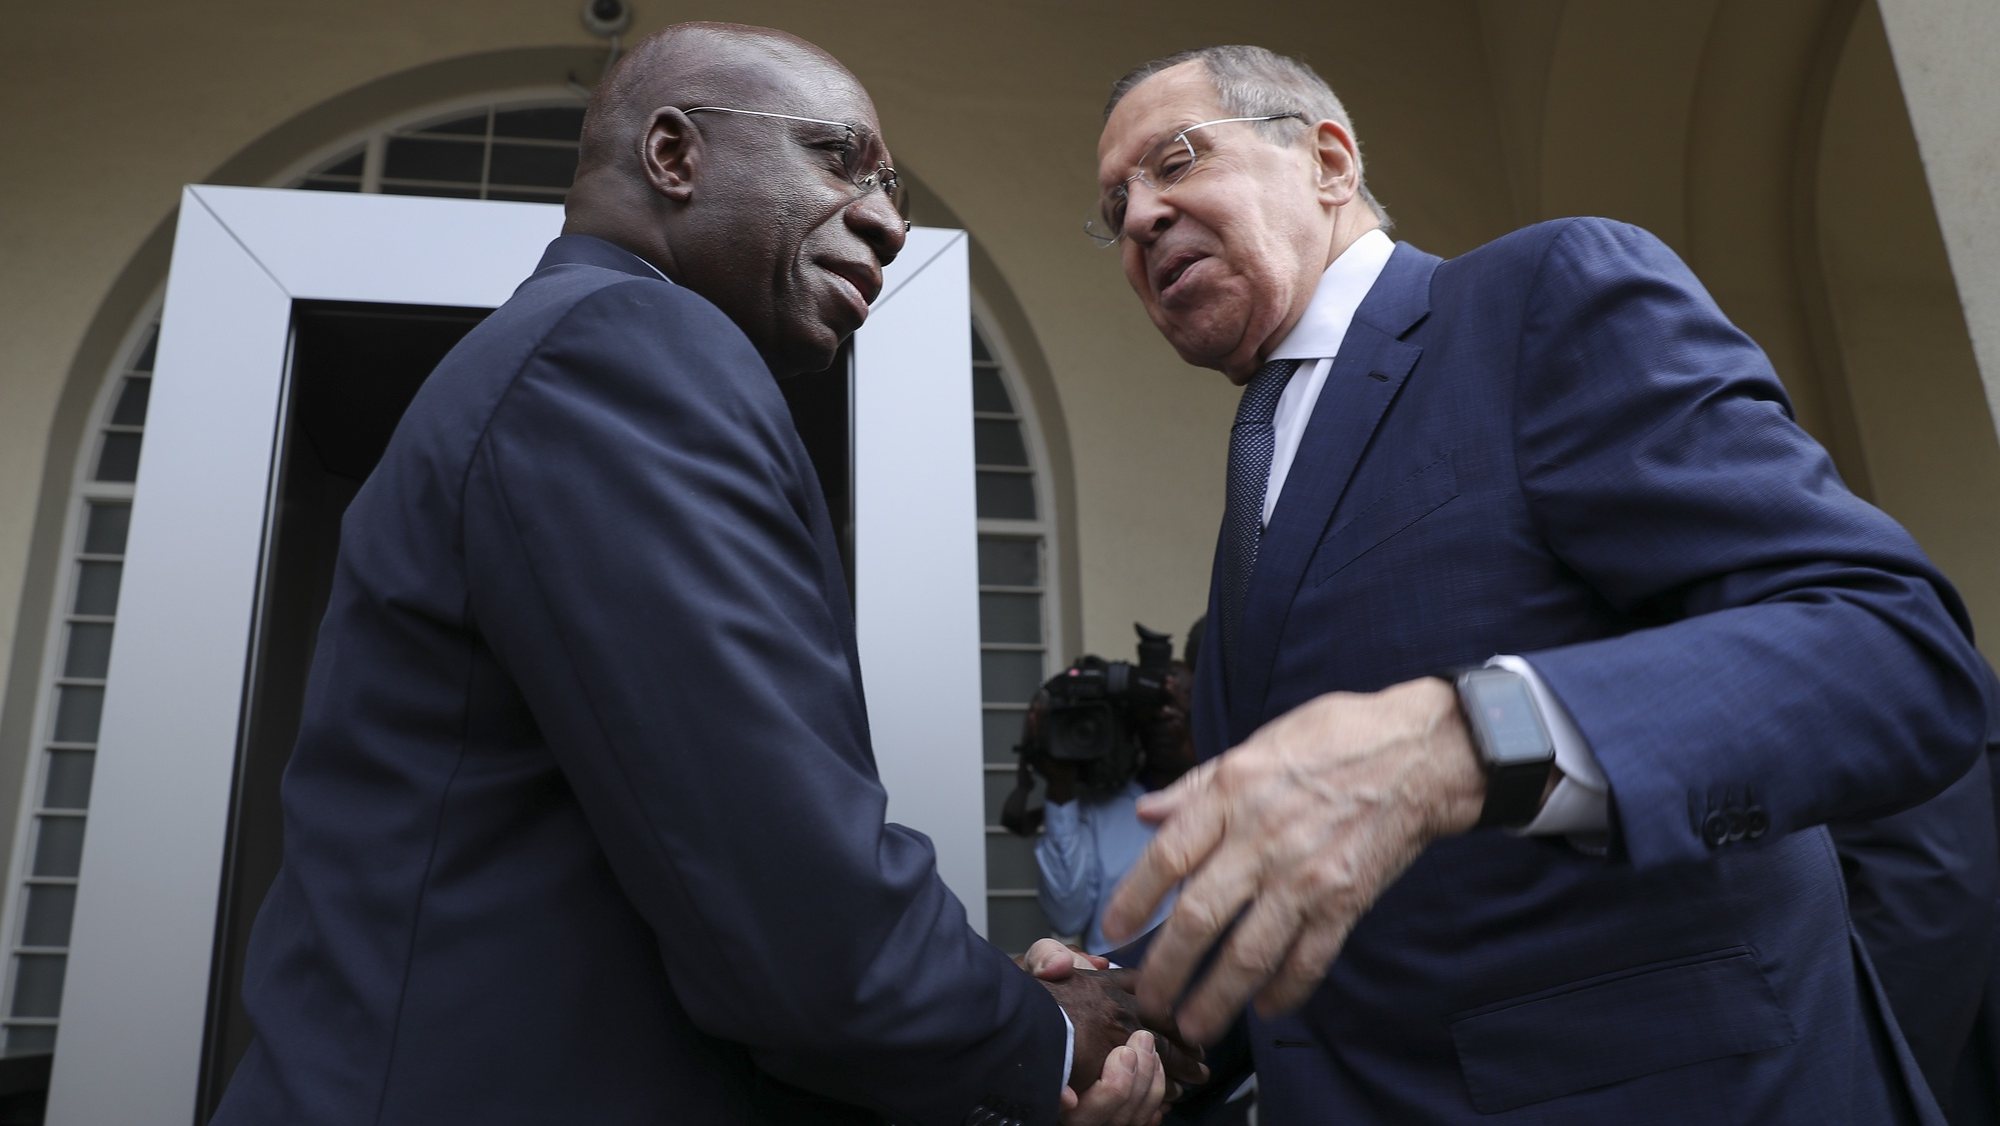 Russia&#039;s Foreign Minister Sergei Lavrov (R) is welcomed by Angola&#039;s Foreign Affairs Minister Tete Antonio (L) on arrival at the Affairs Minister in Luanda, Angola, 25 January 2023. The Foreign Affairs official&#039;s working visit comes at a time when Angola, after taking a neutral stance on the war in Ukraine by abstaining from voting on a United Nations resolution condemning the Russian invasion in March, joined in October the majority of countries that condemned Russia&#039;s annexation of Ukrainian territories. AMPE ROGERIO/LUSA